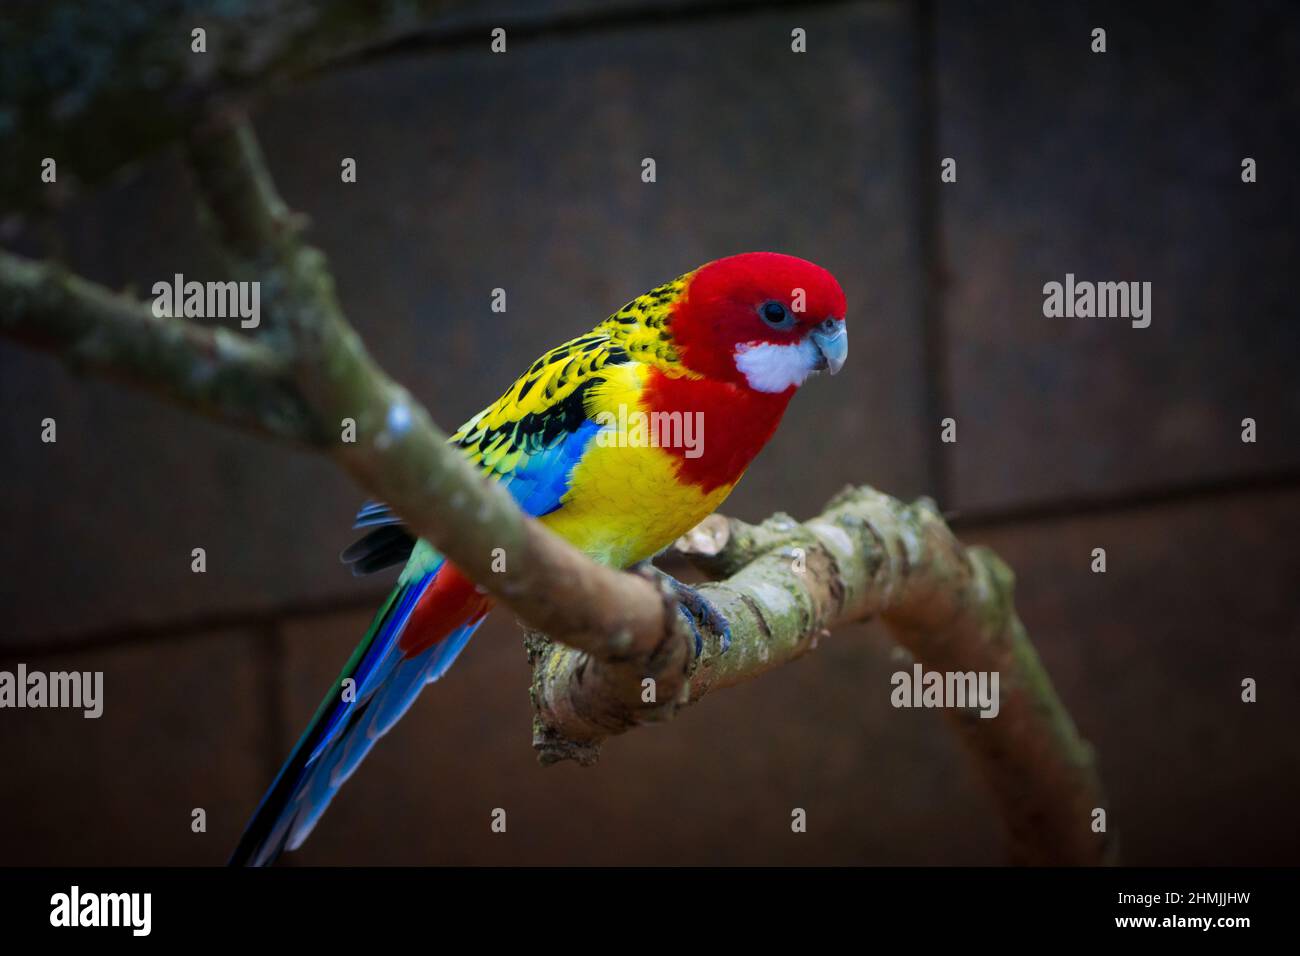 Eastern Rosella perched on a tree branch Stock Photo